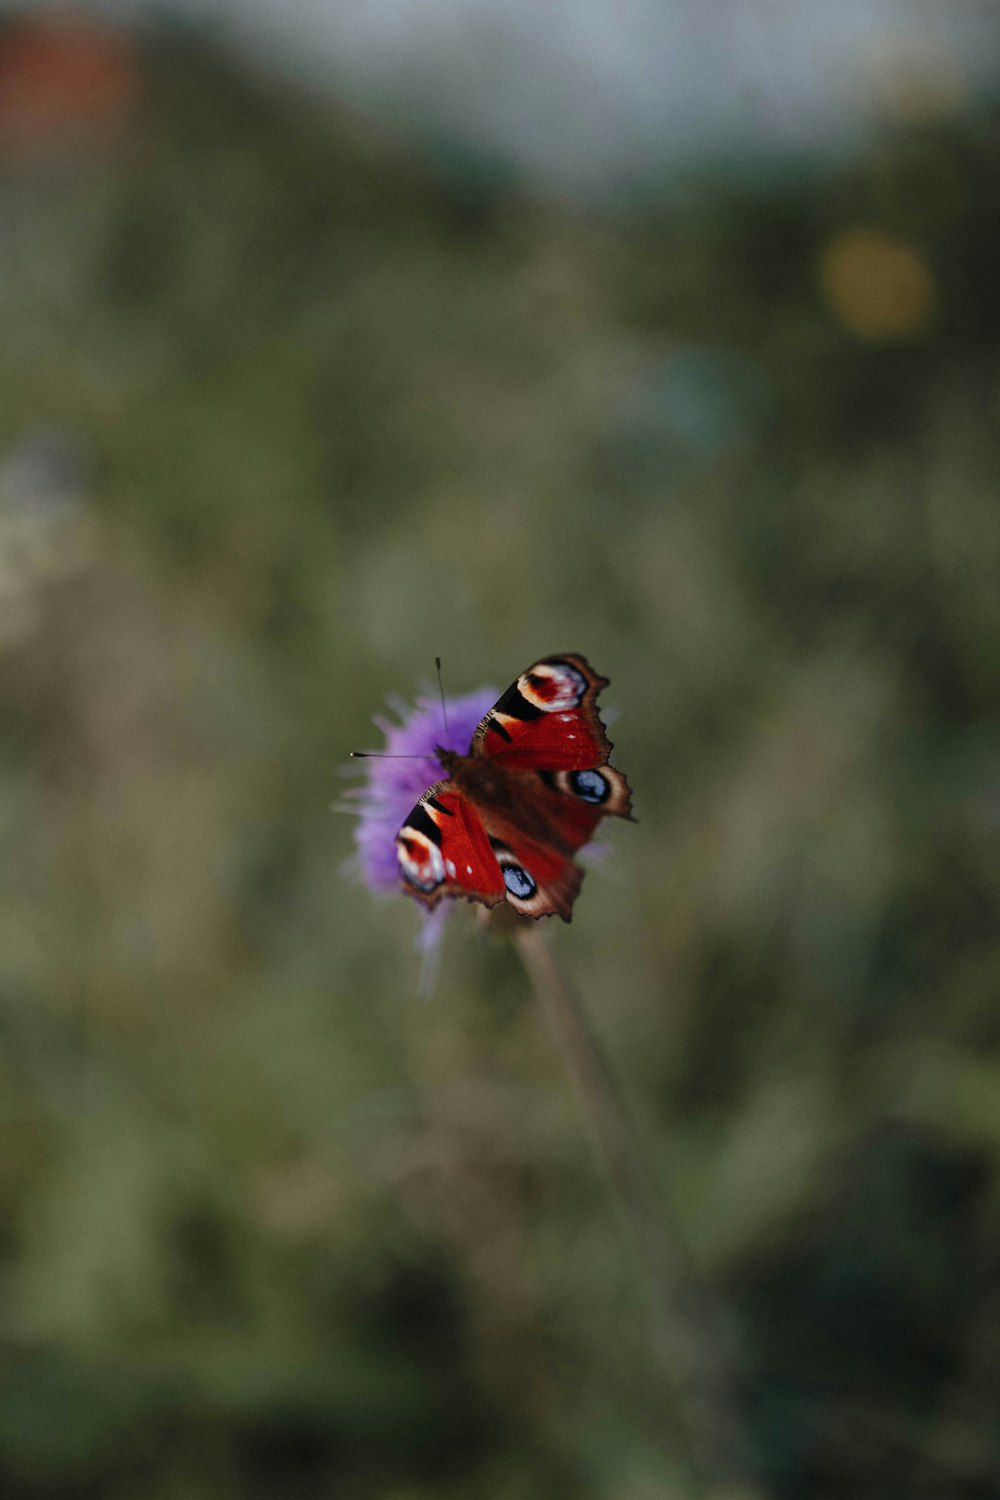 red and black butterfly perched on purple flower in close up photography during daytime